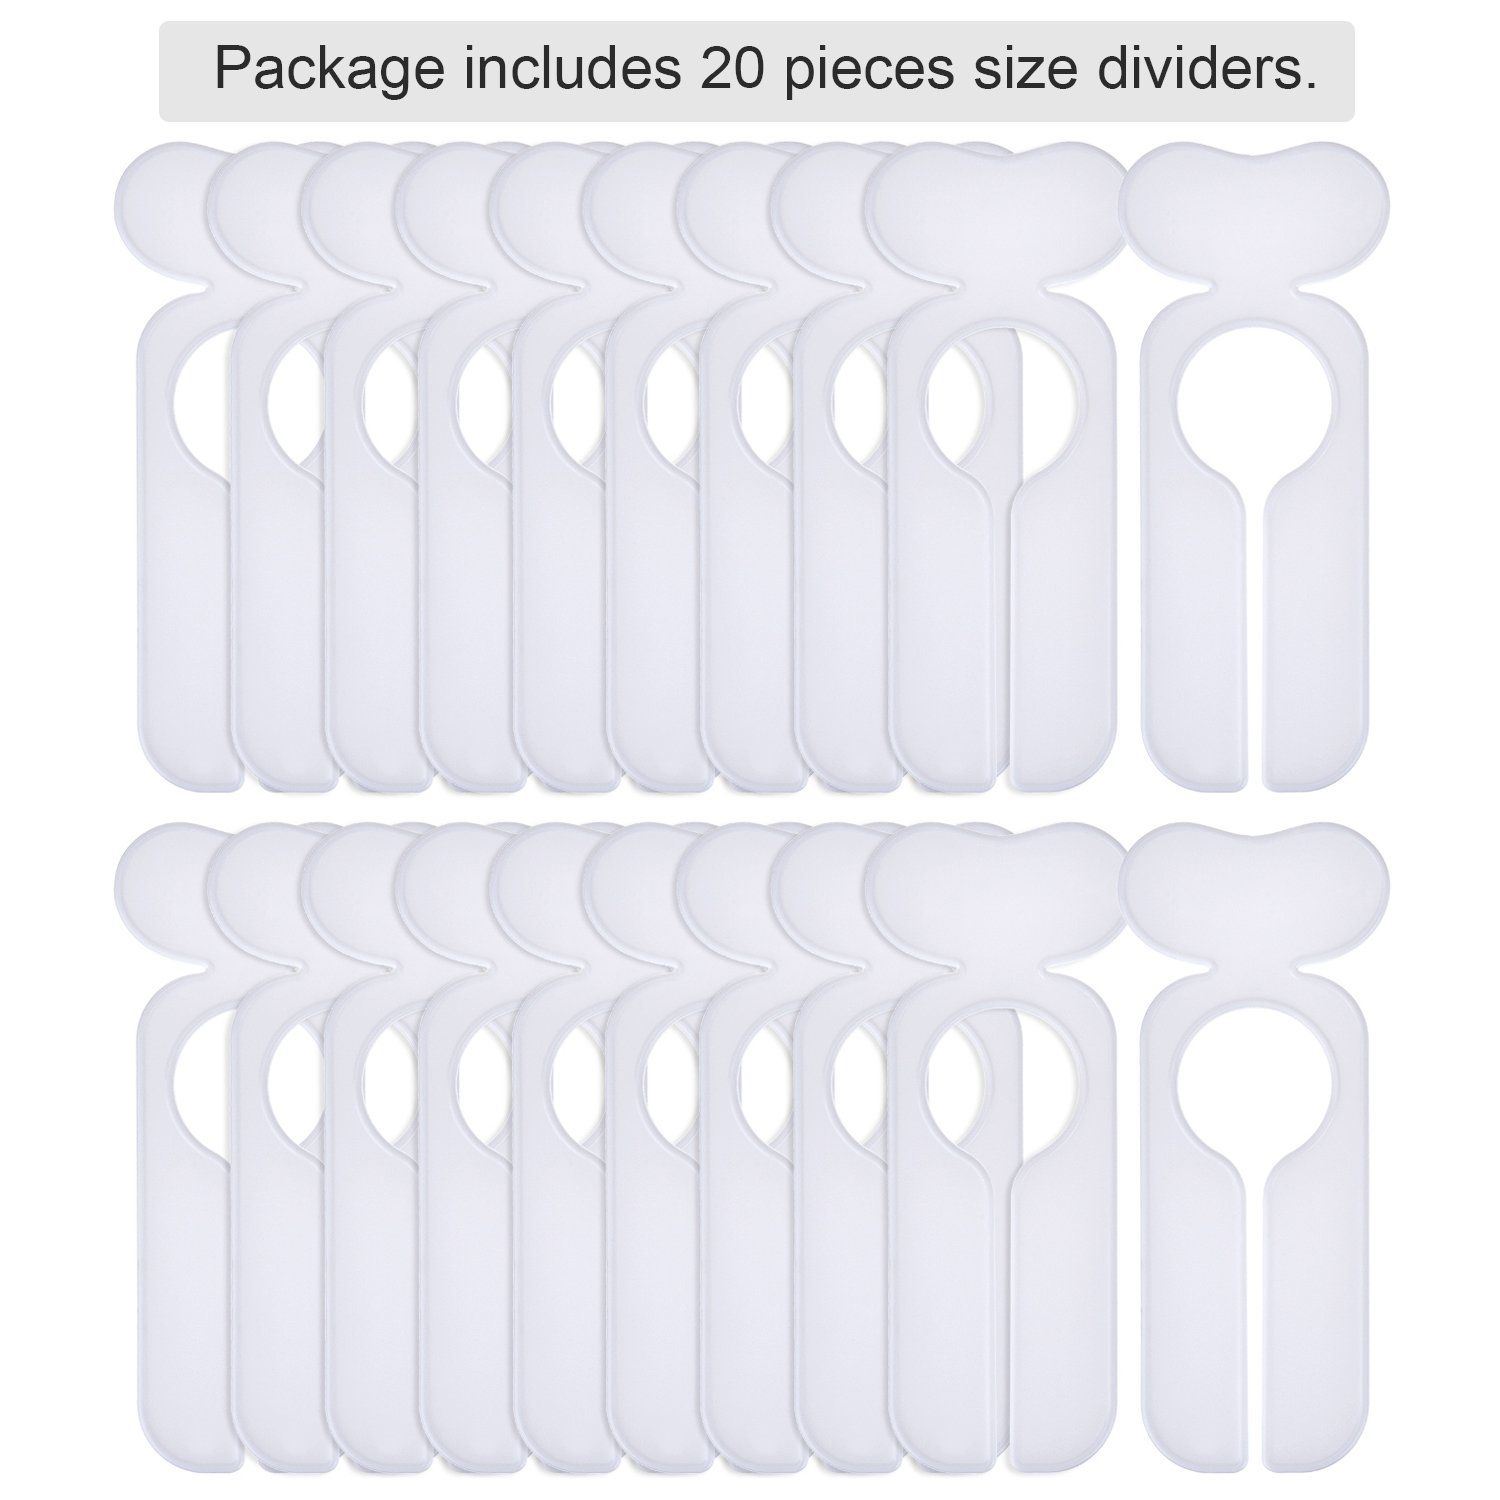 Great Choice Products 20 Pack Closet Dividers For Hanging Clothes Clothing Size Clothing Rack Dividers Baby Closet Dividers Weekly Clothes Org…